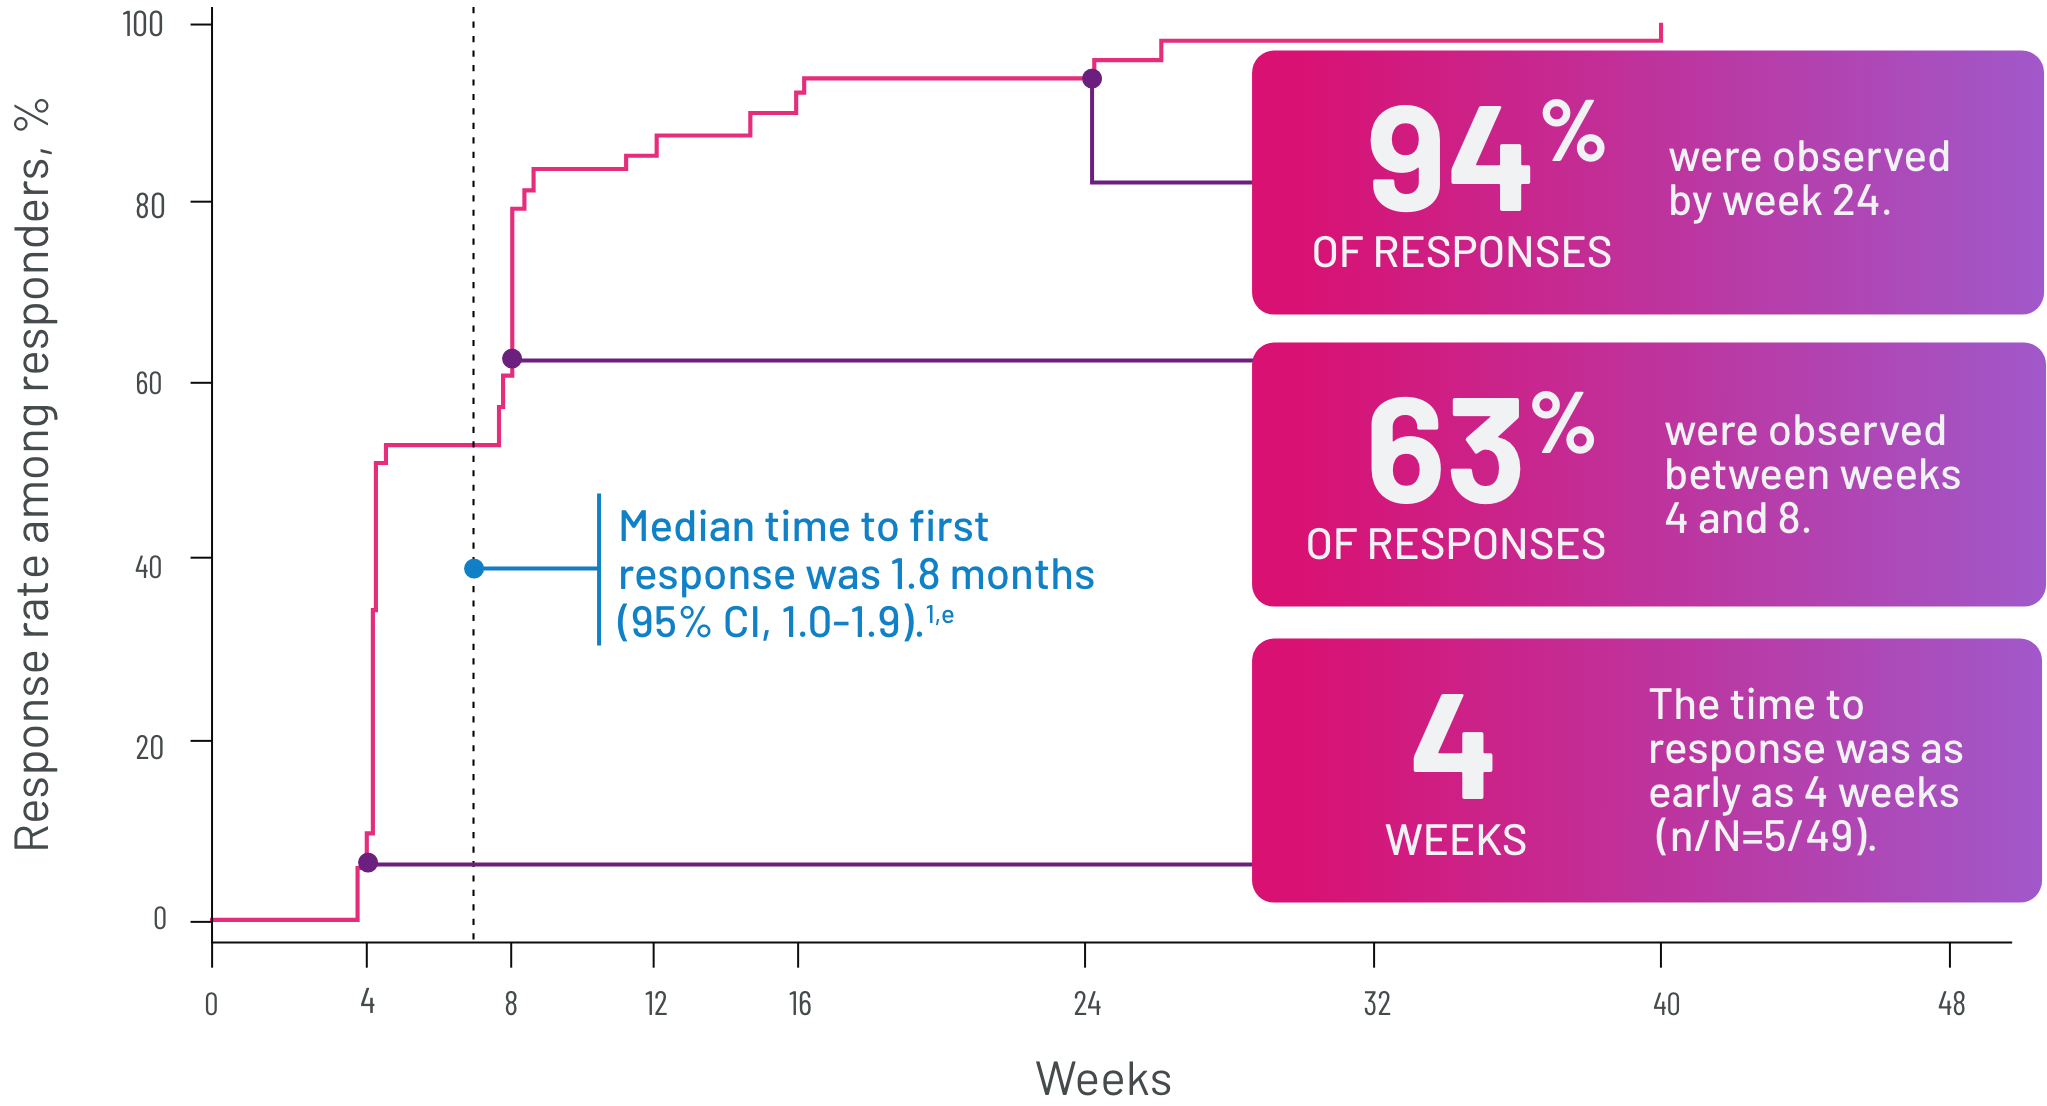 graphic showing the time to response was as early as 4 weeks (n/N=5/49), 63% of responses were observed between weeks 4 and 8, 94% of responses were observed by week 24 and the median time to response was 1.8 months (95% CI, 1.0-1.9)